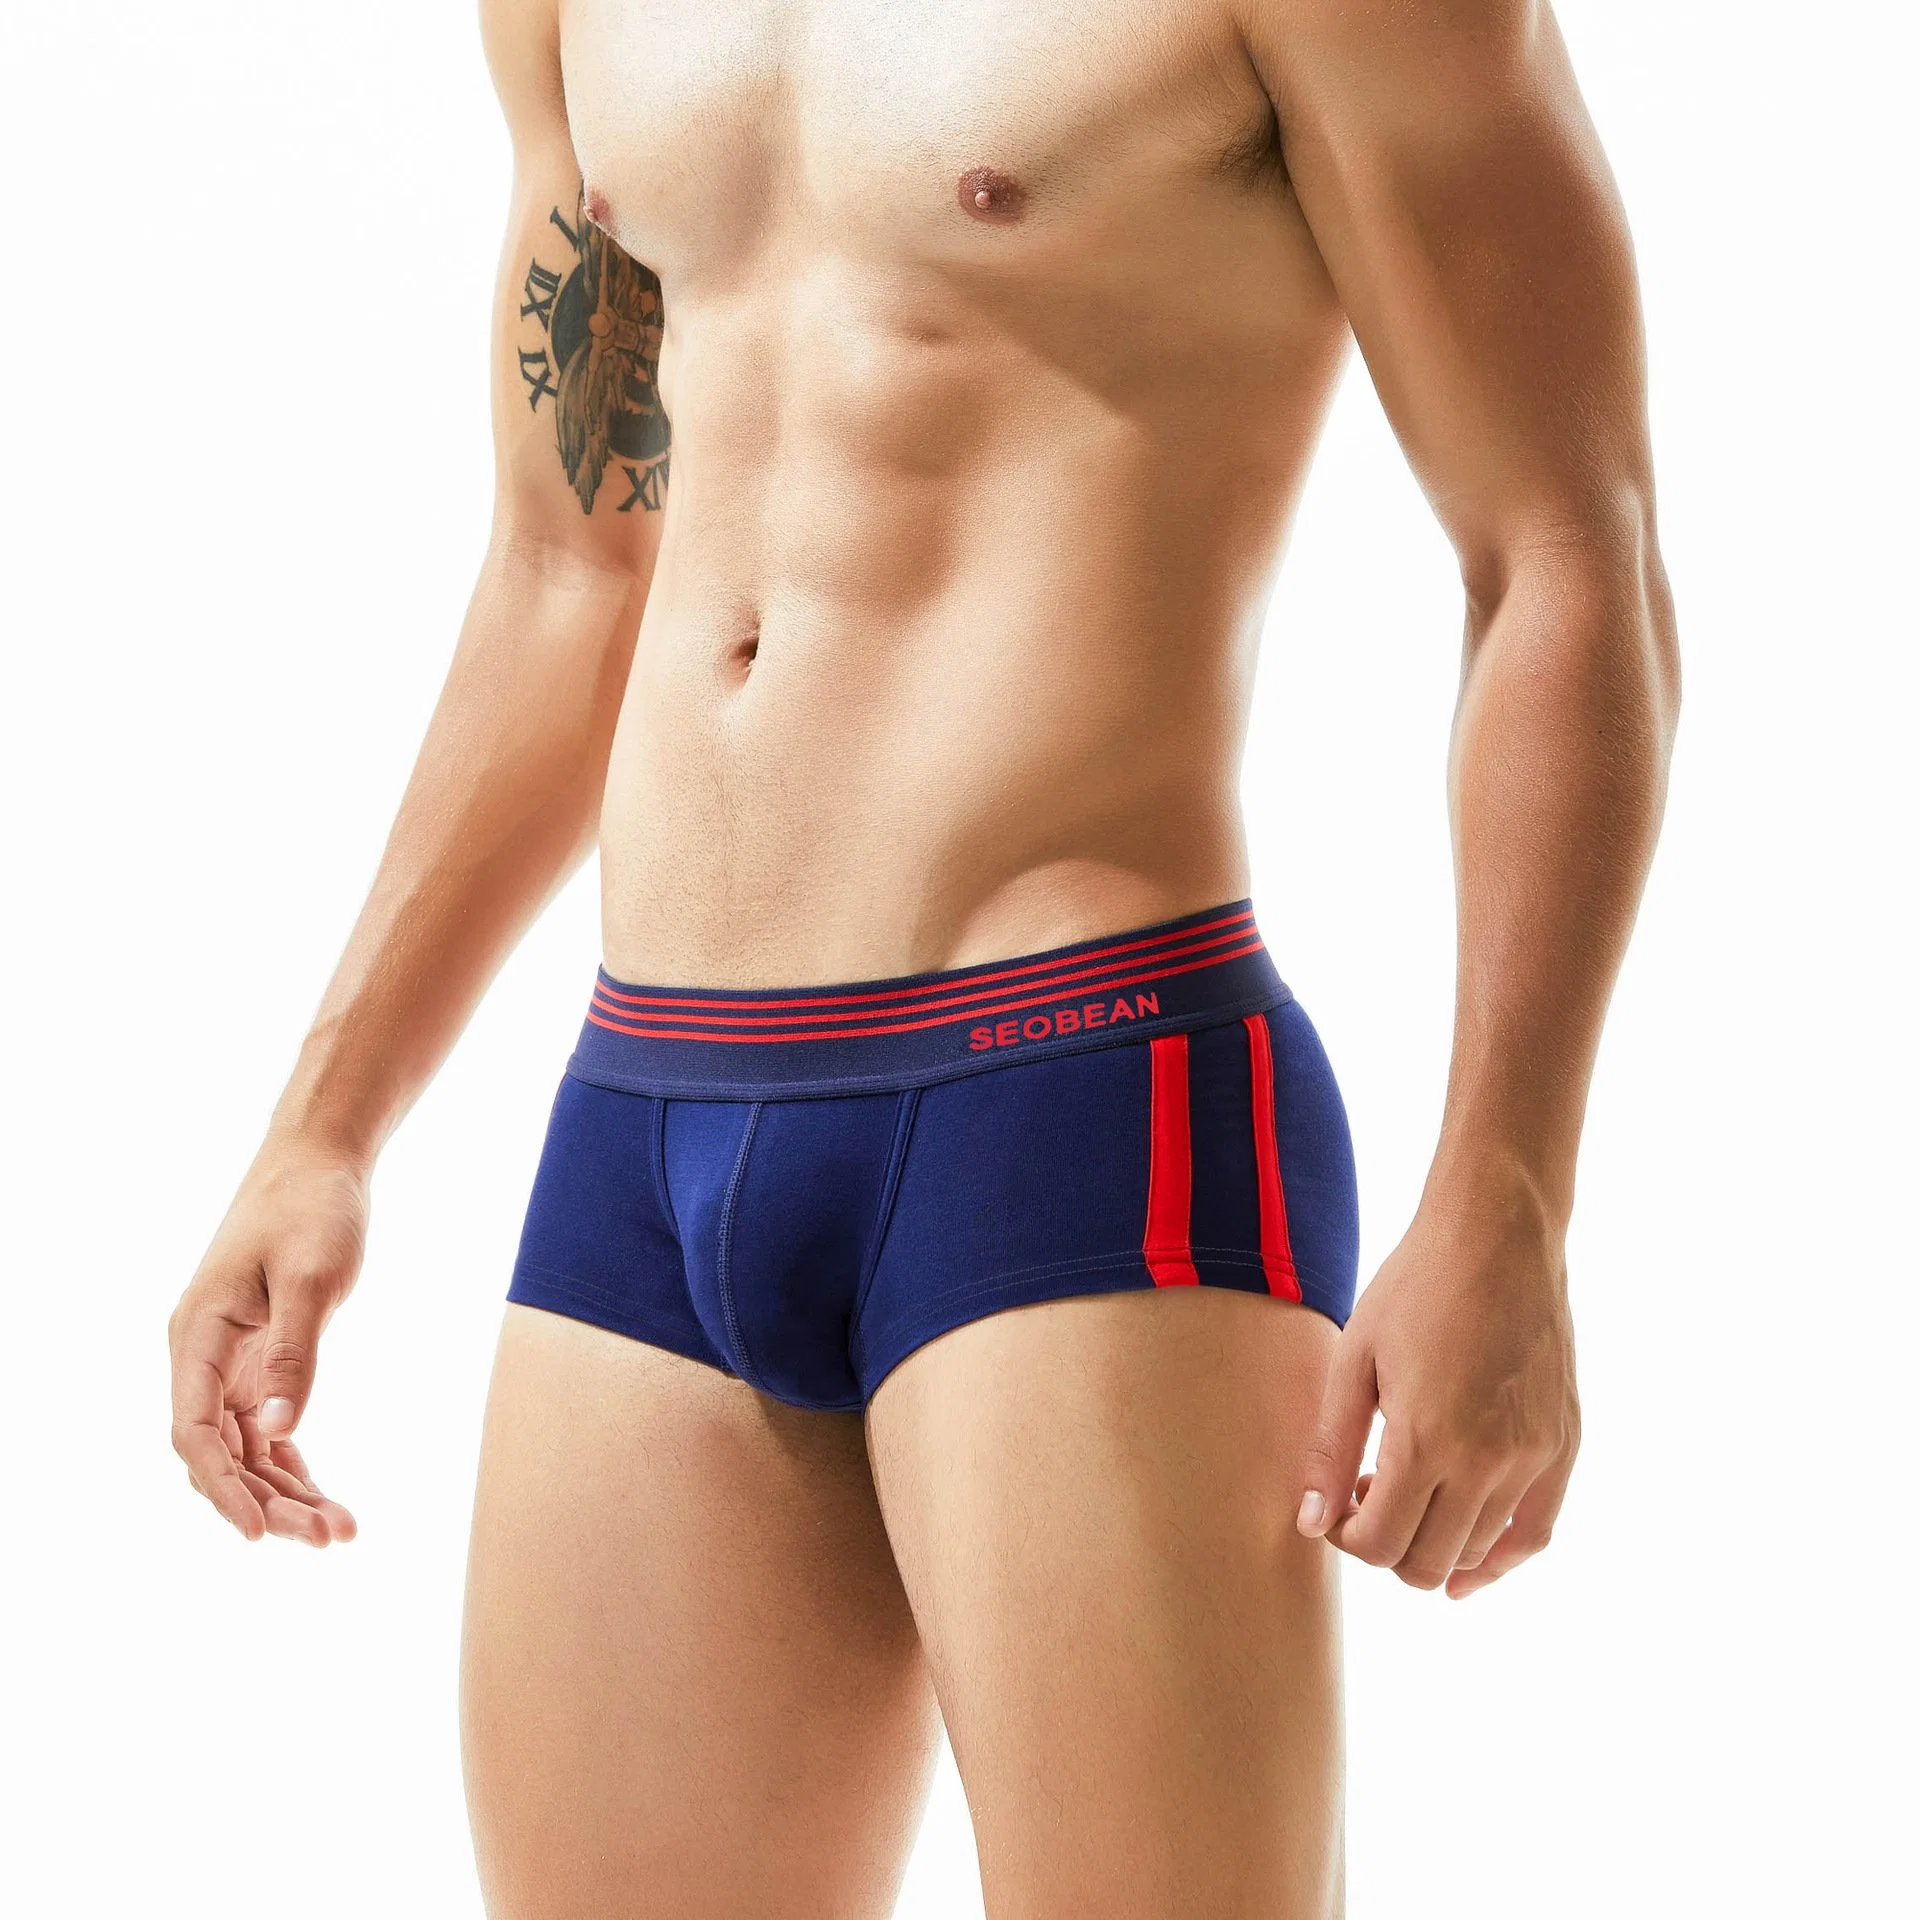 Men's High Quality Comfortable Breathable Cotton Skin-Friendly Underwear